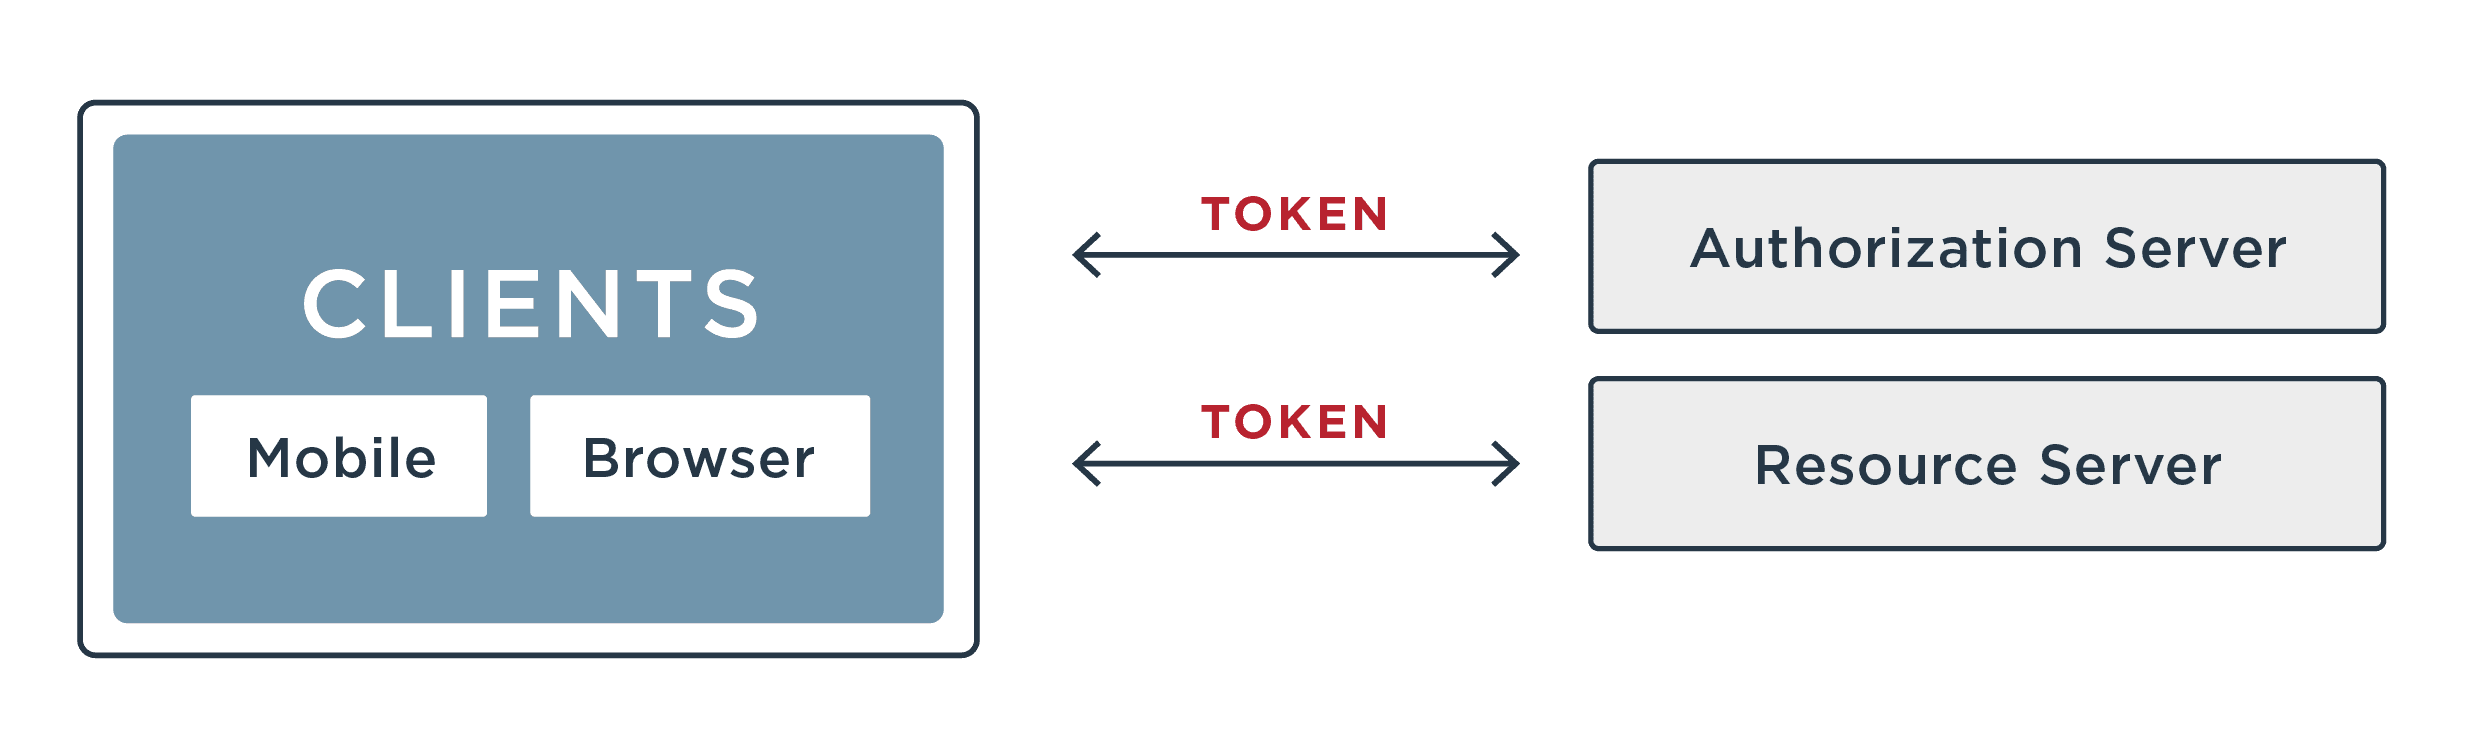 Illustration showing how token-based authentication works for web APIs. The clients mobile device or browser sends a request to authorization or resources server, the identity is confirmed and a token is sent back.